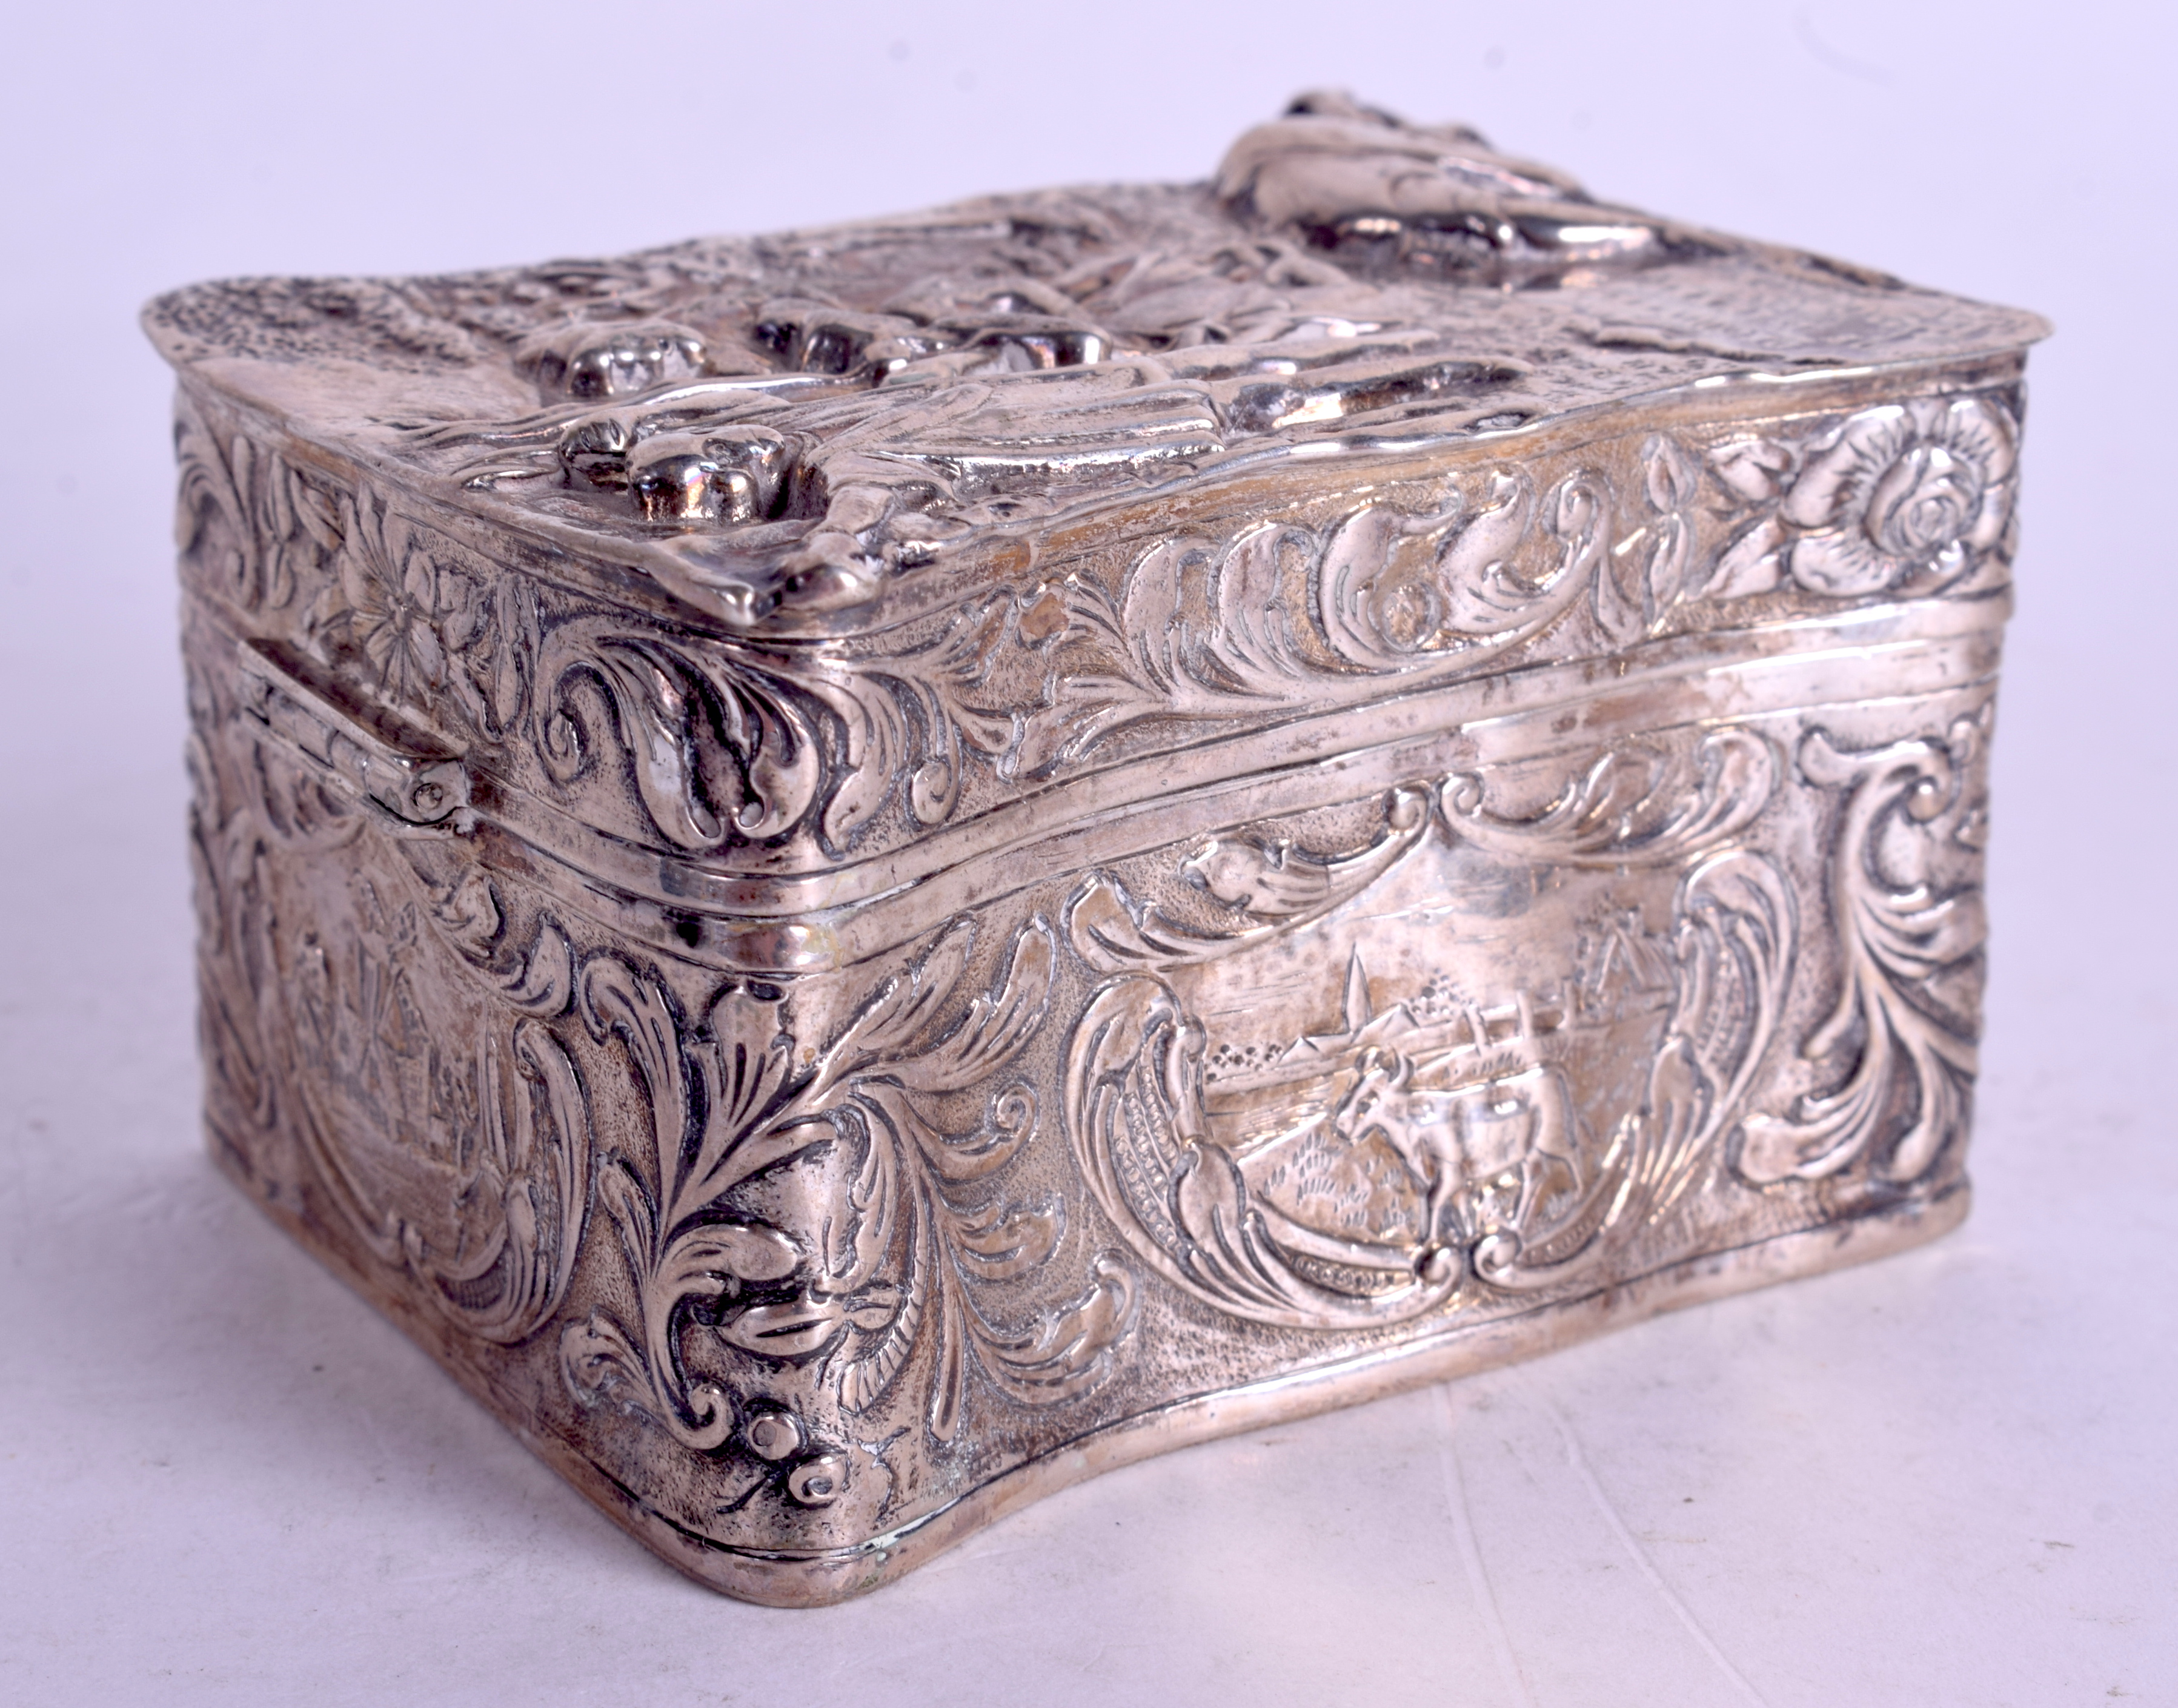 A RARE ANTIQUE CONTINENTAL SILVER BOX decorated with figures and landscapes. 5.1 oz. 7.5 cm x 6.5 c - Image 2 of 5